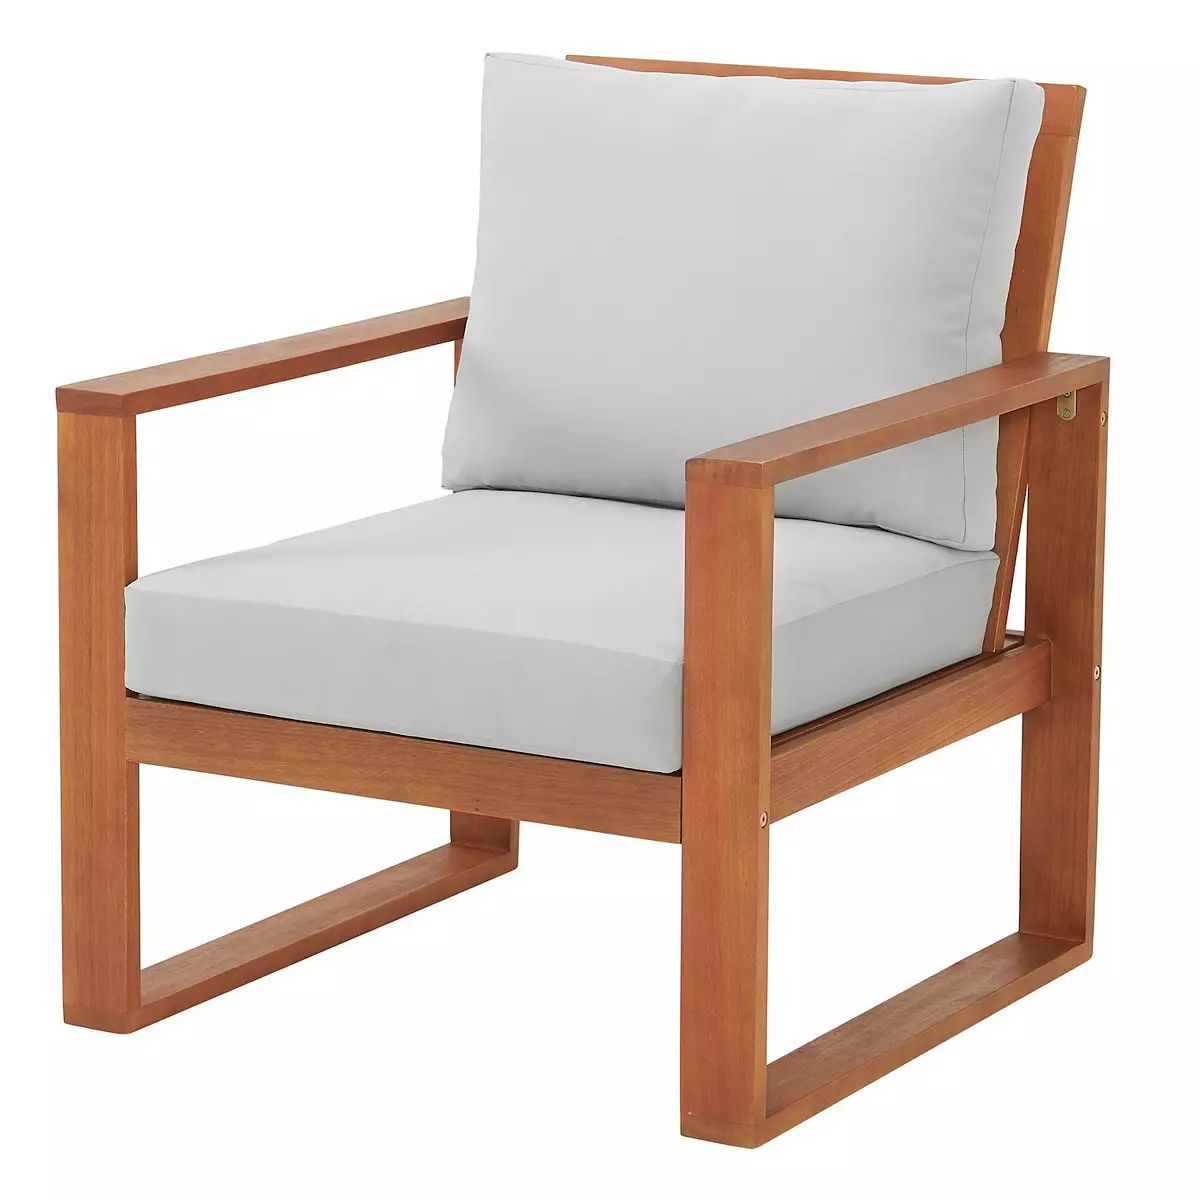 Alaterre Furniture Grafton Outdoor Patio Chair | Kohl's